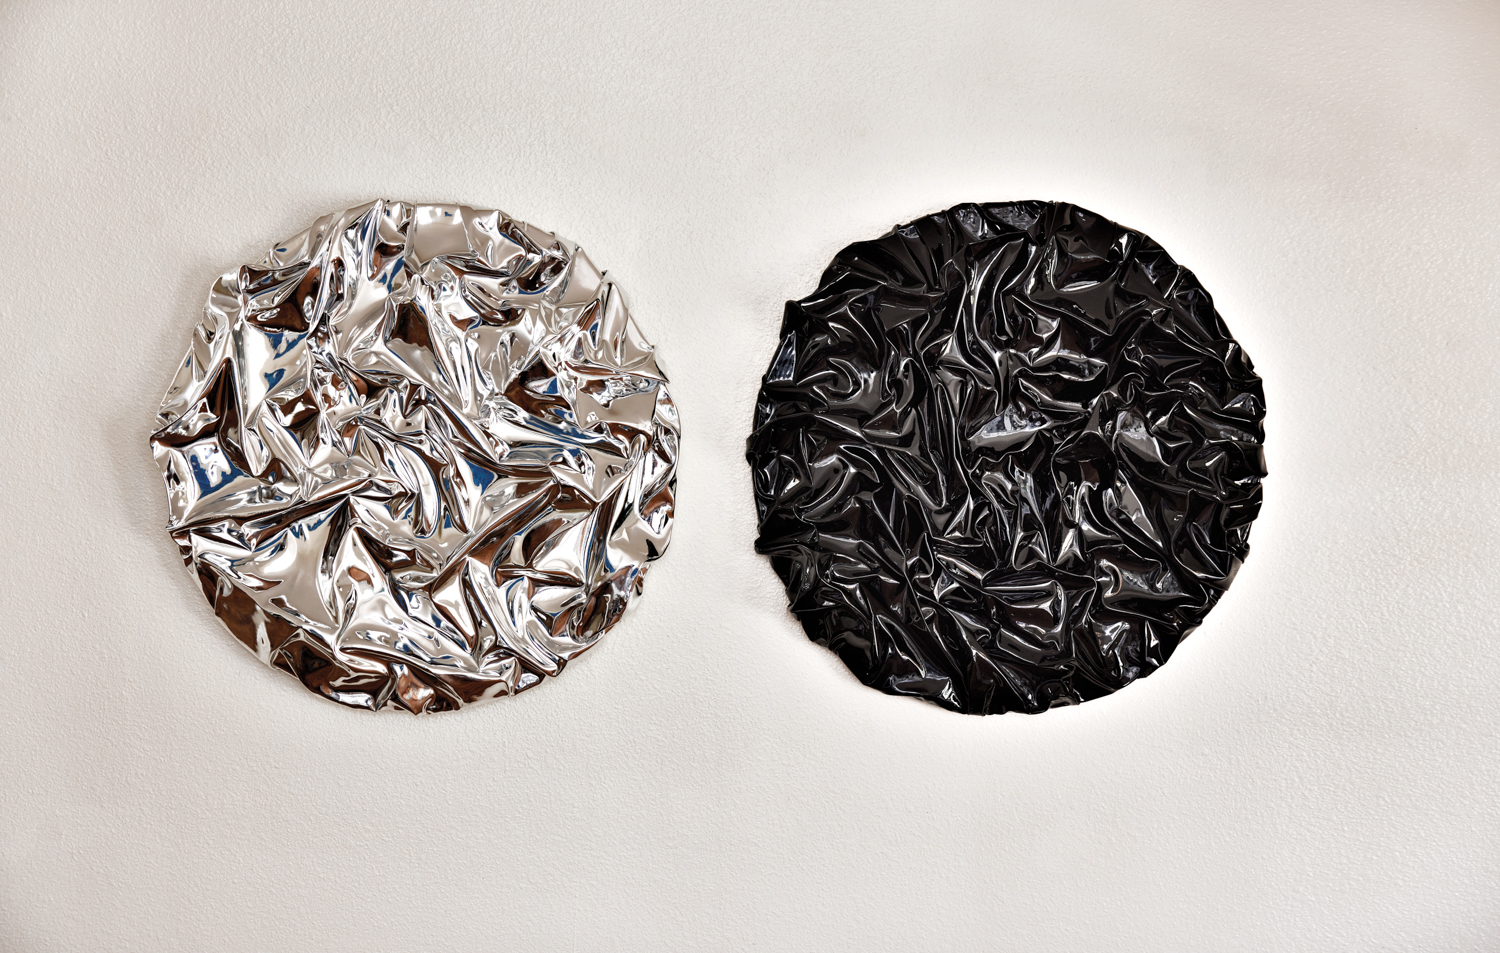 two metallic, textured, circular artworks, one silver and one black